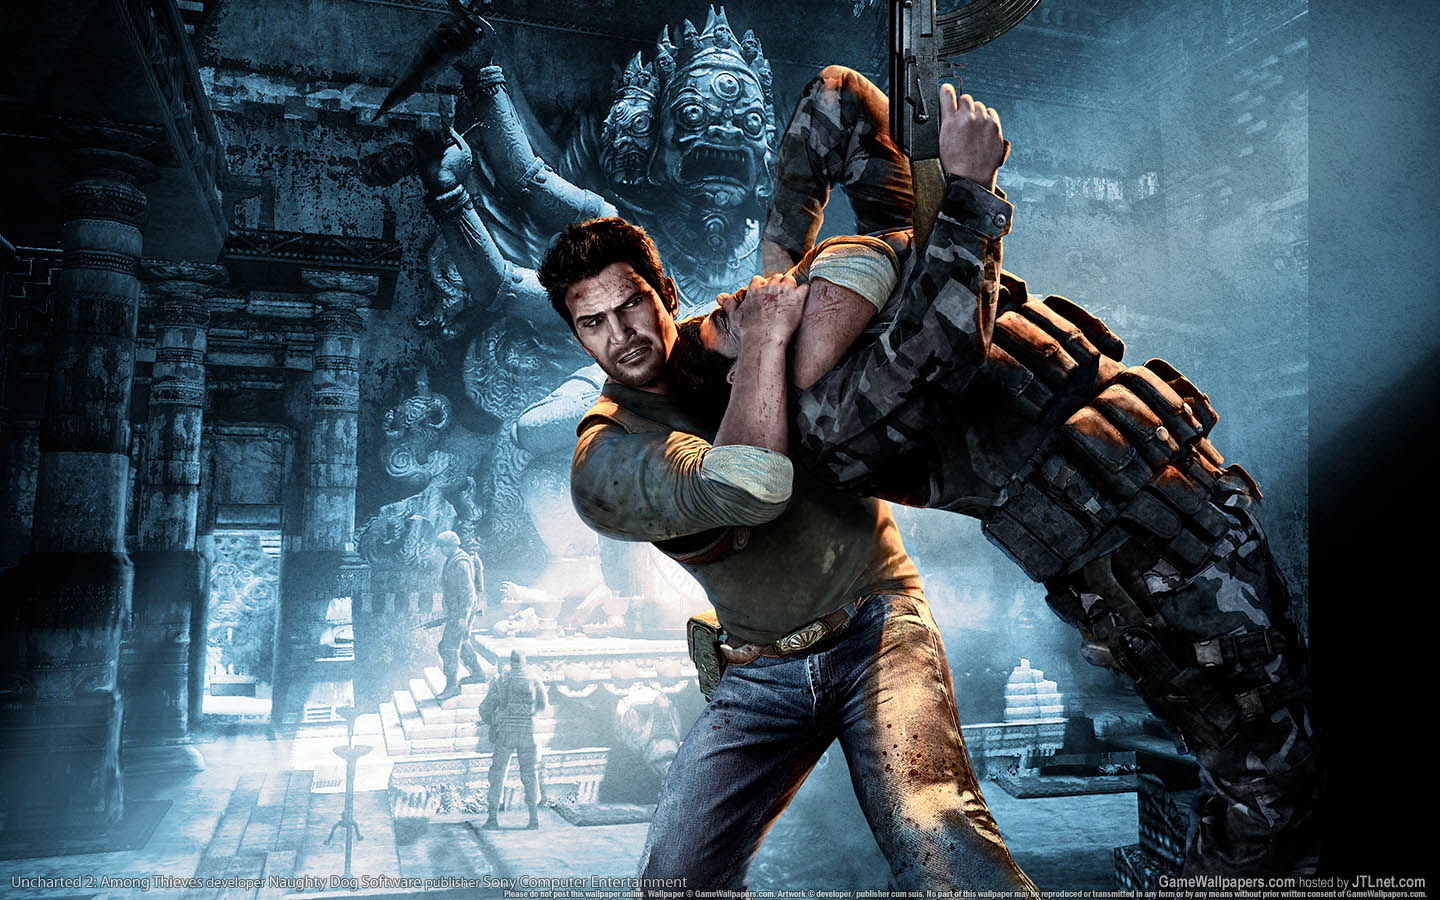 Uncharted 2: Among Thieves fond d'cran 03 1440x900